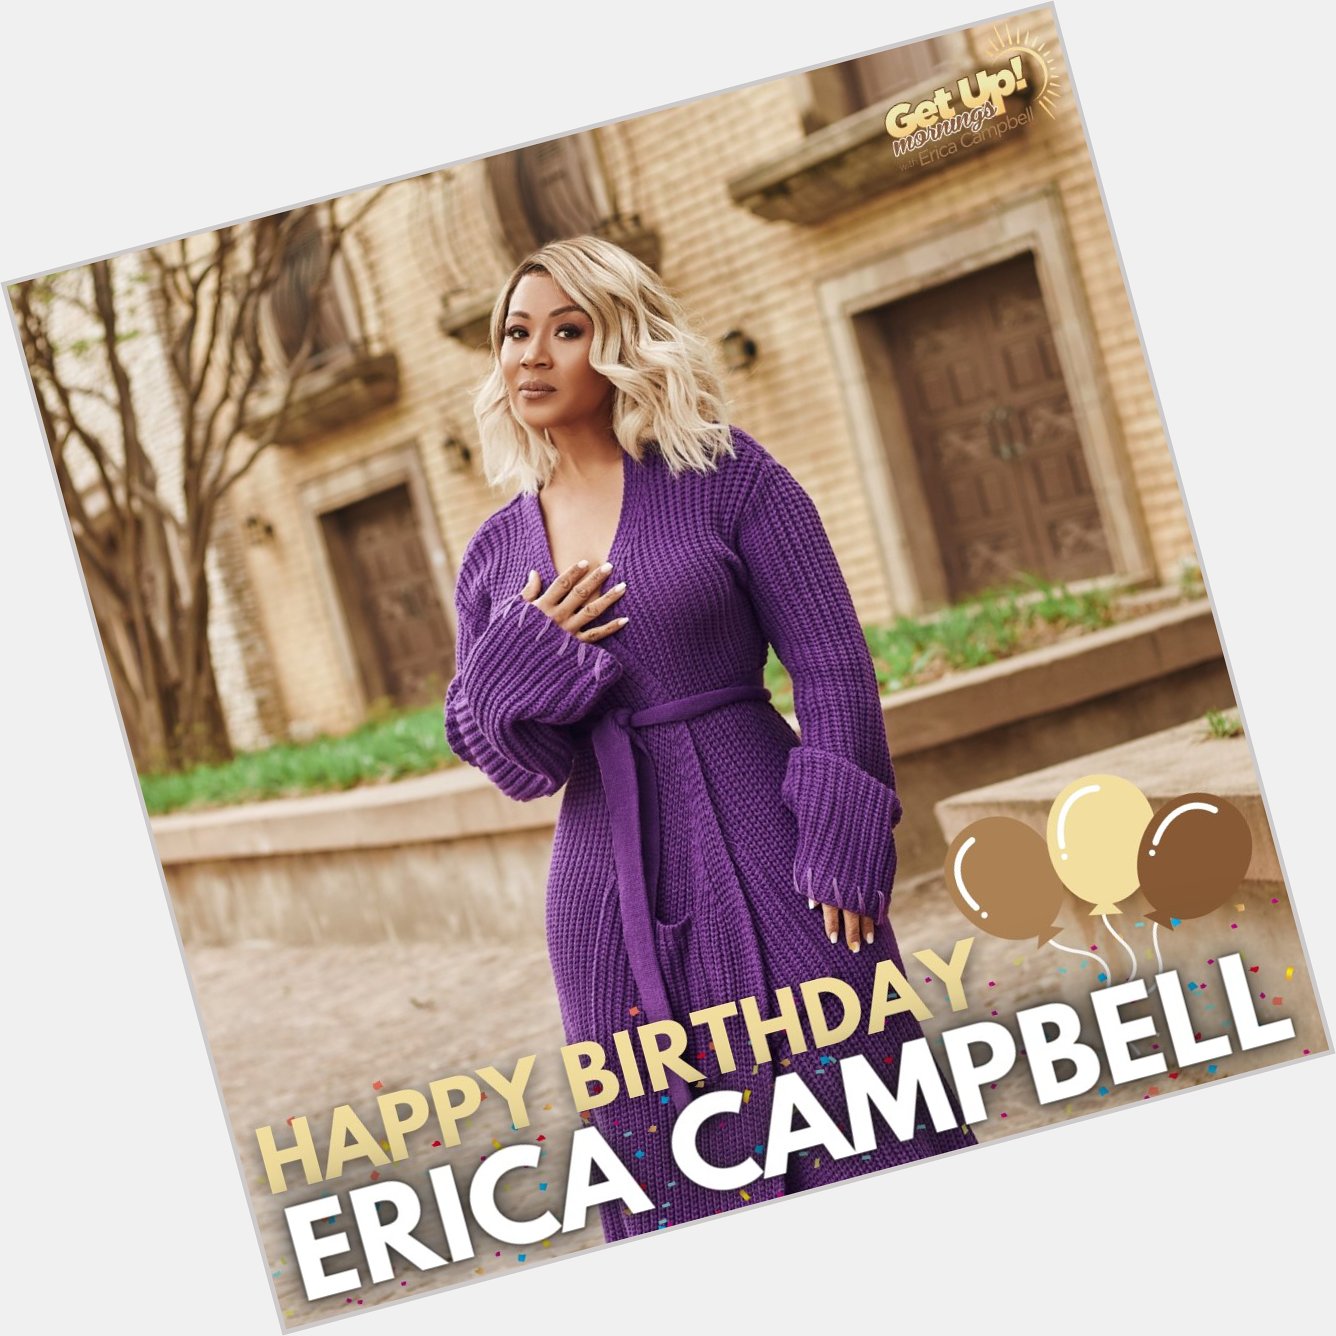 Sending birthday wishes to our own Erica Campbell! Happy birthday!!  